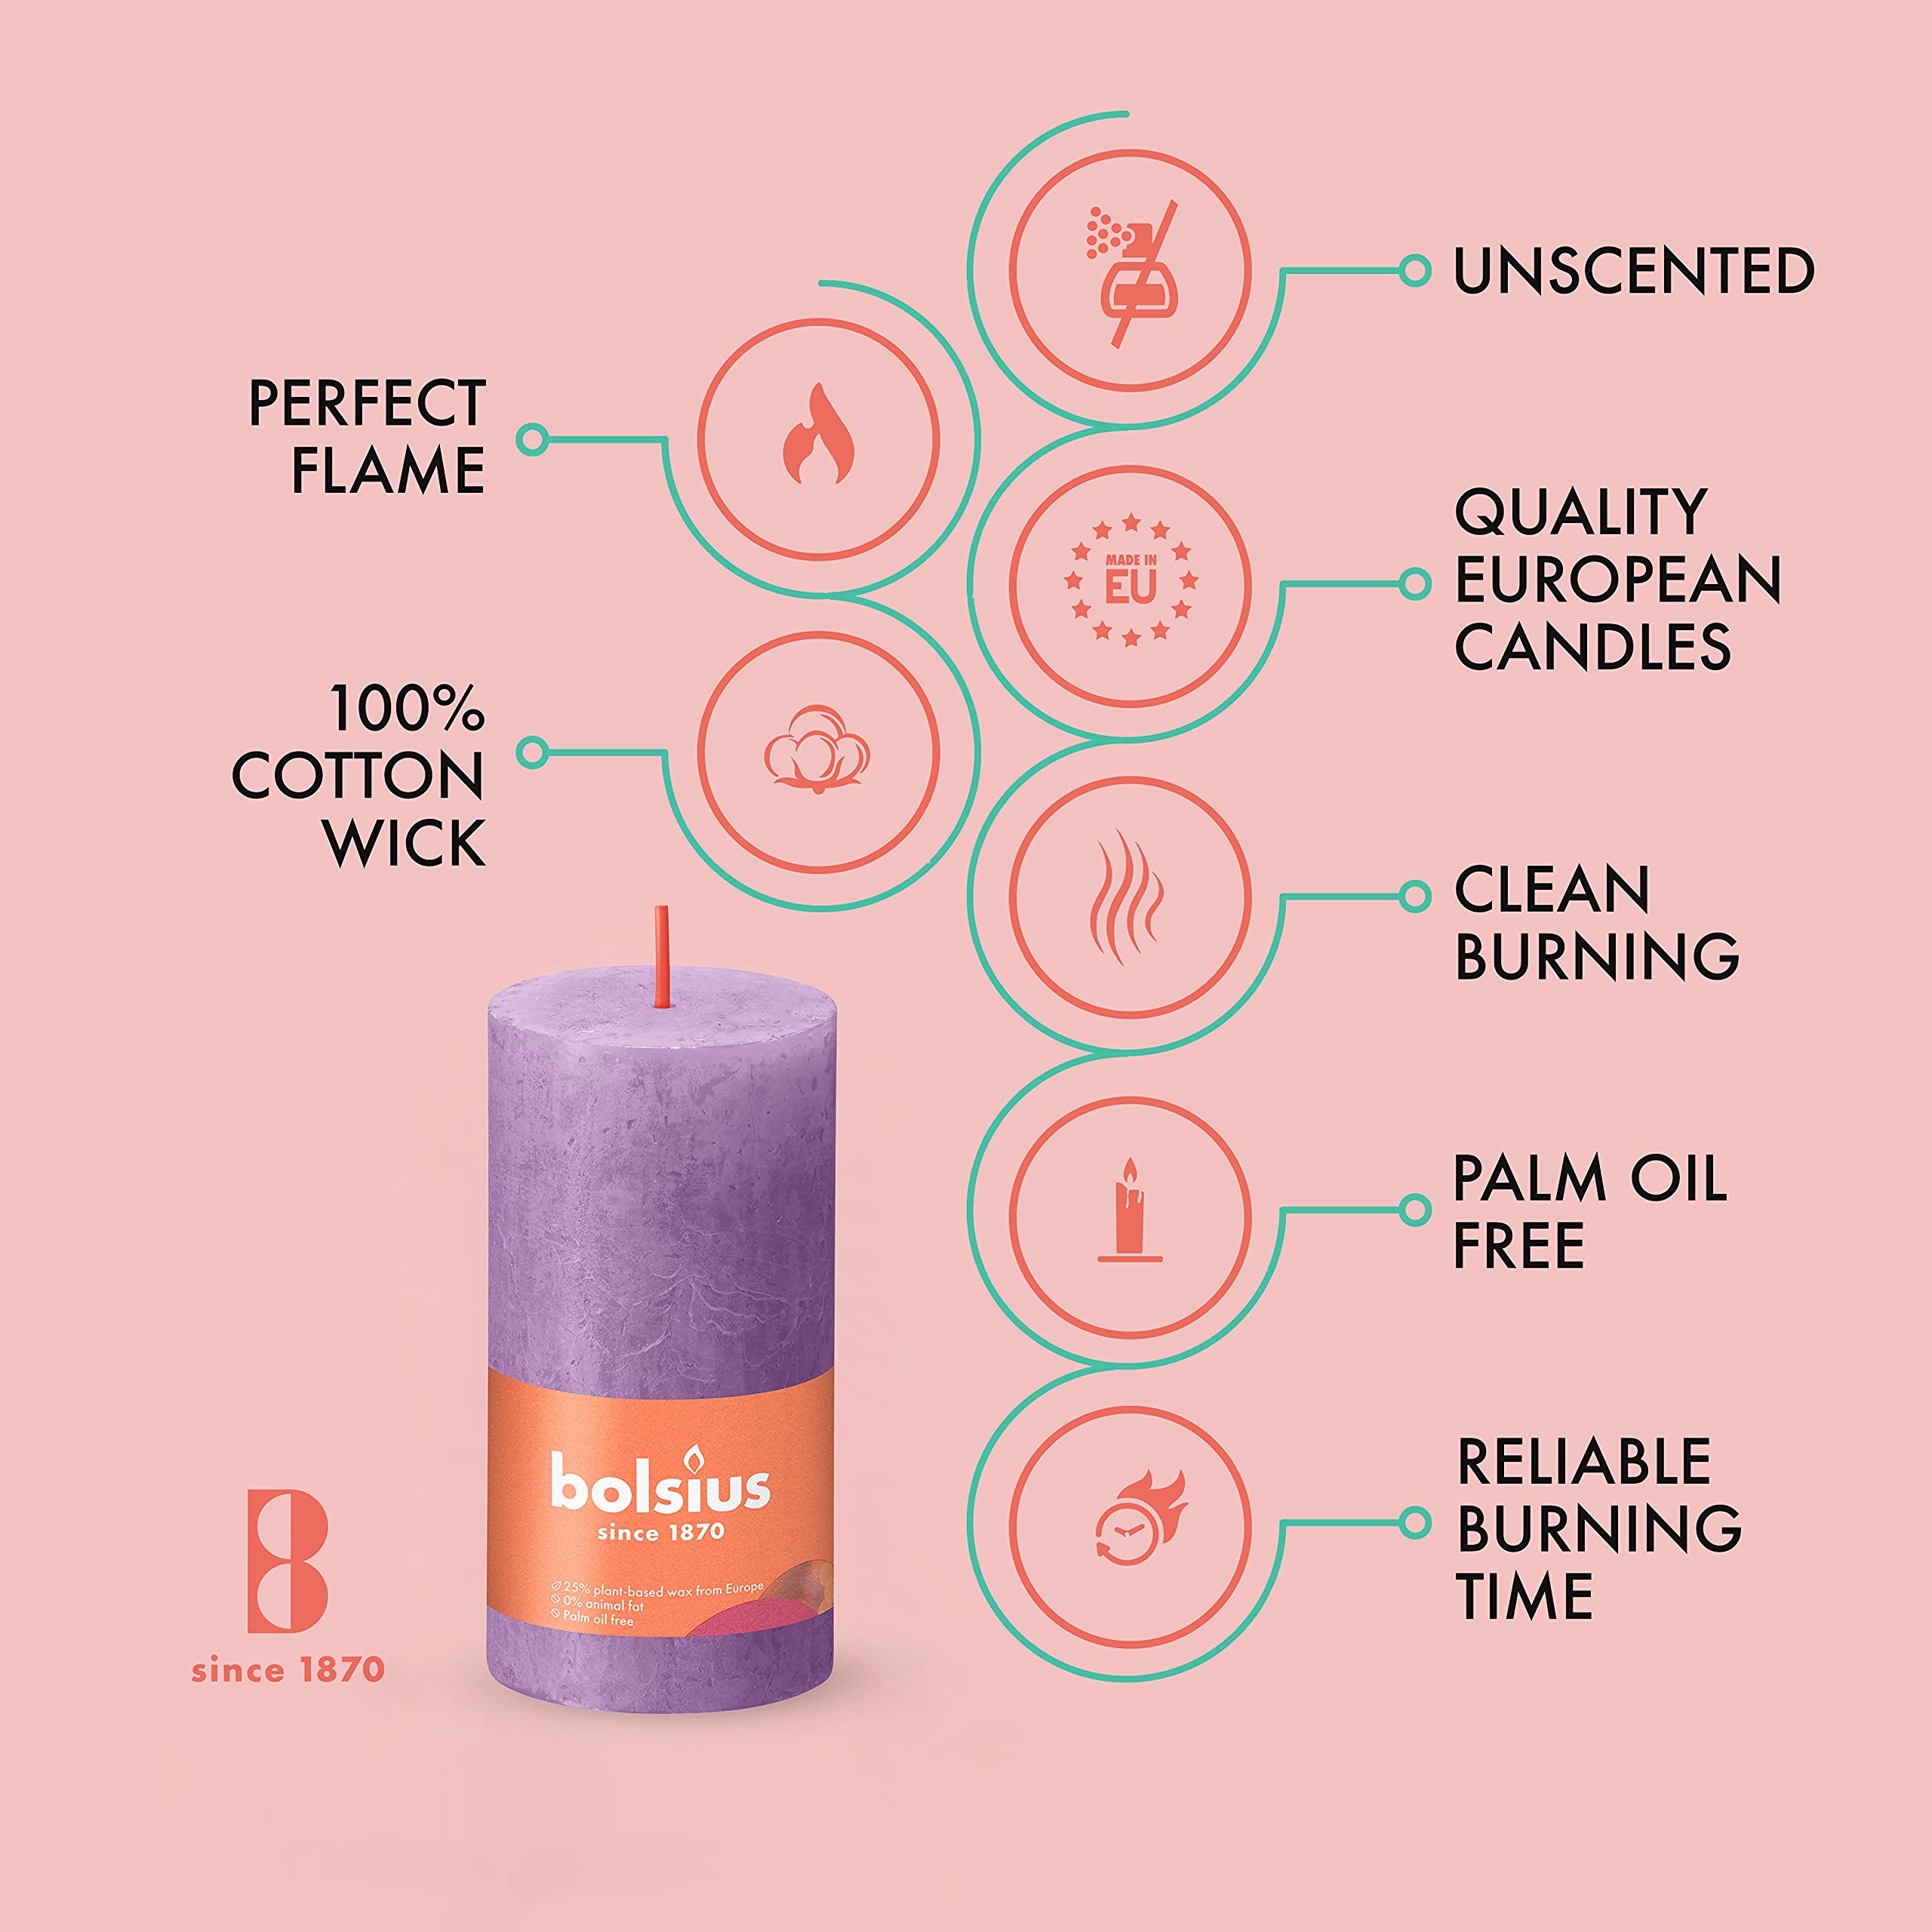 BOLSIUS 4 Pack Vibrant Violet (Purple) Rustic Pillar Candles - 2 X 4 Inches - Premium European Quality - Includes Natural Plant-Based Wax - Unscented Dripless Smokeless 30 Hour Party D�cor Candles  - Acceptable